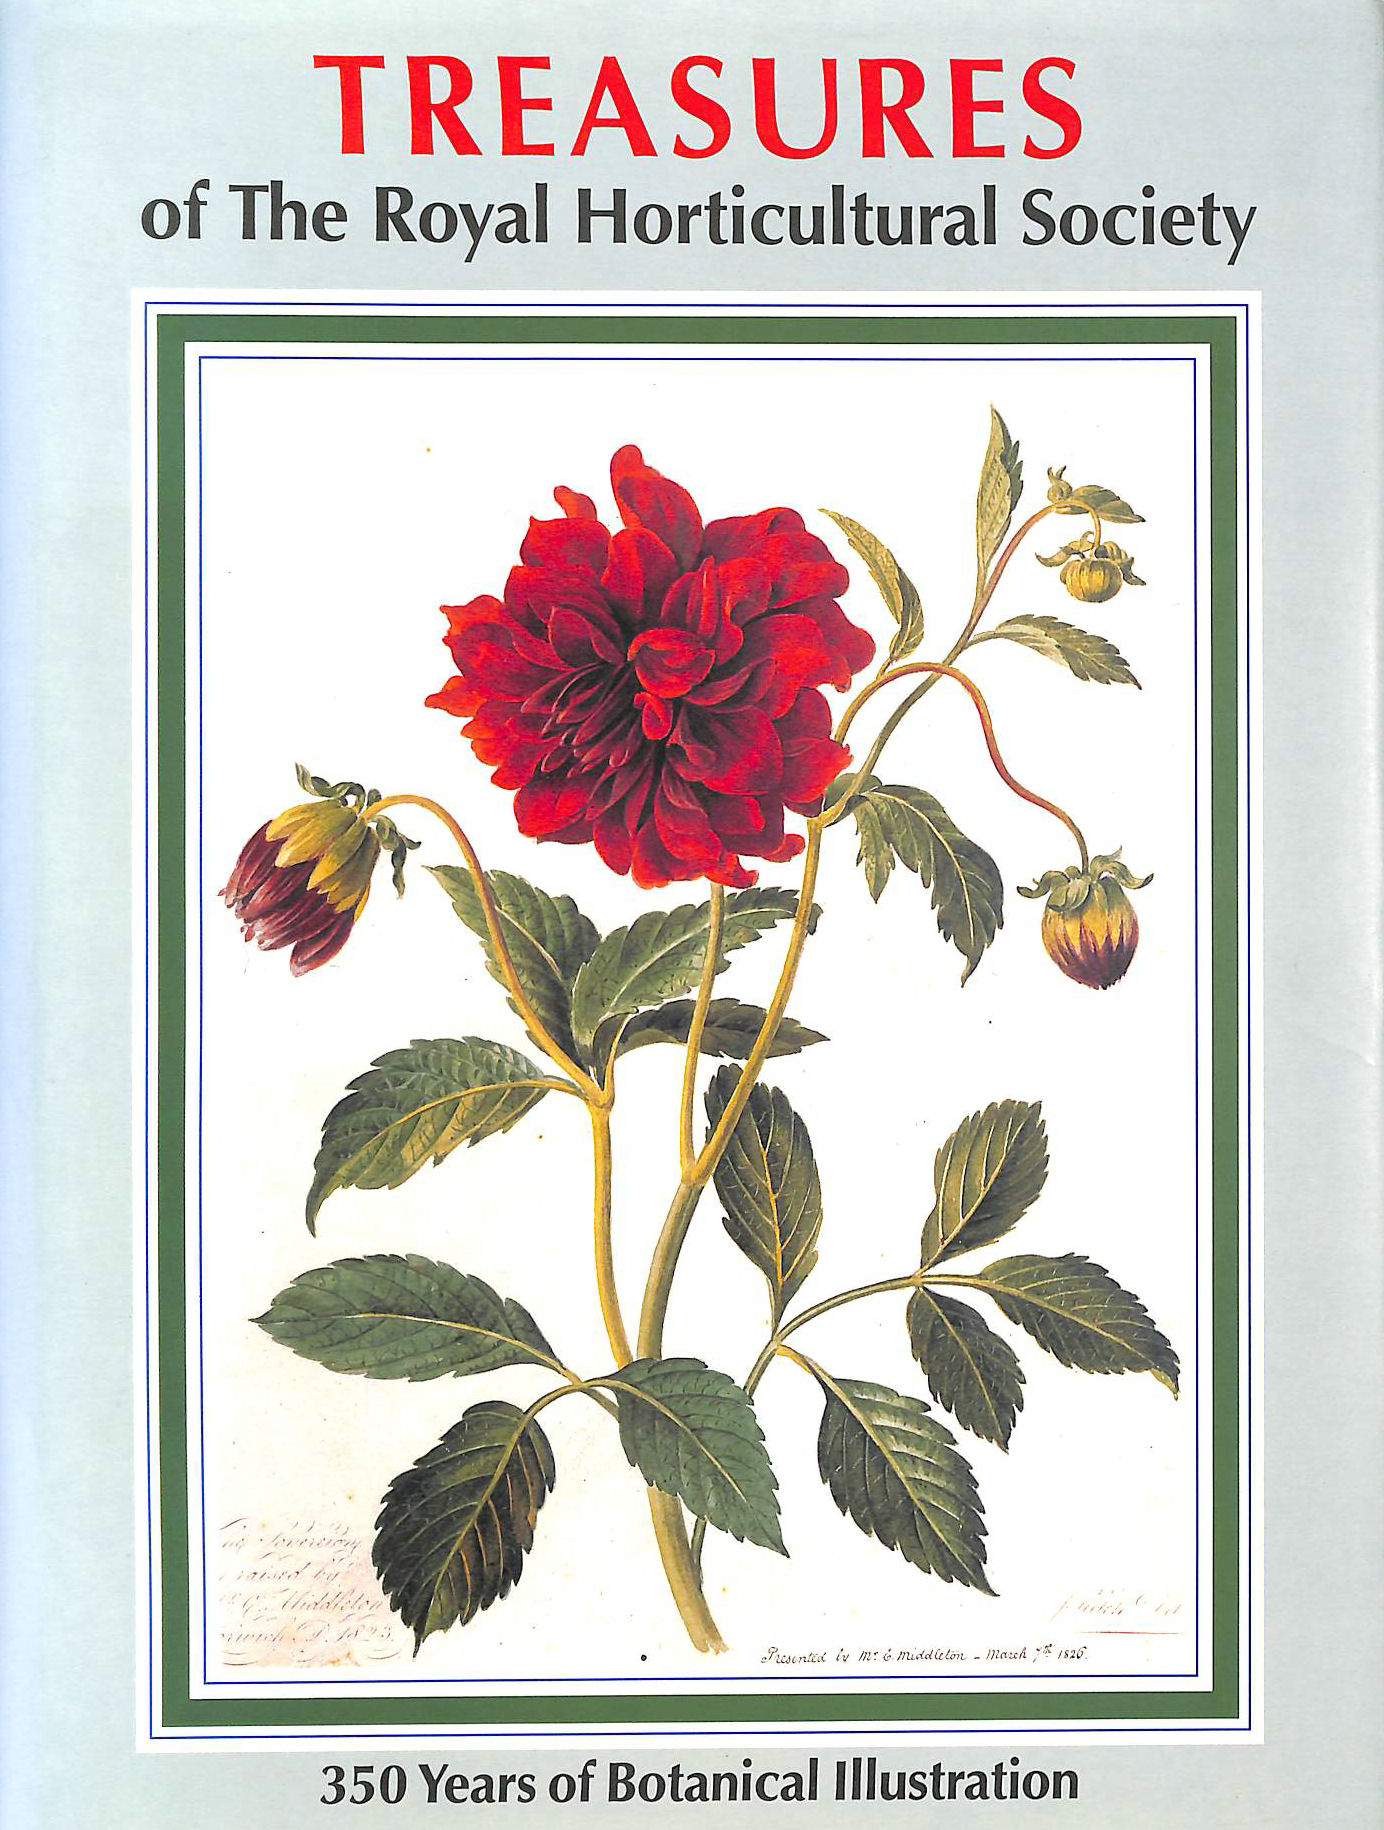 ELLIOTT, BRENT - Treasures of the Royal Horticultural Society (Art Reference)